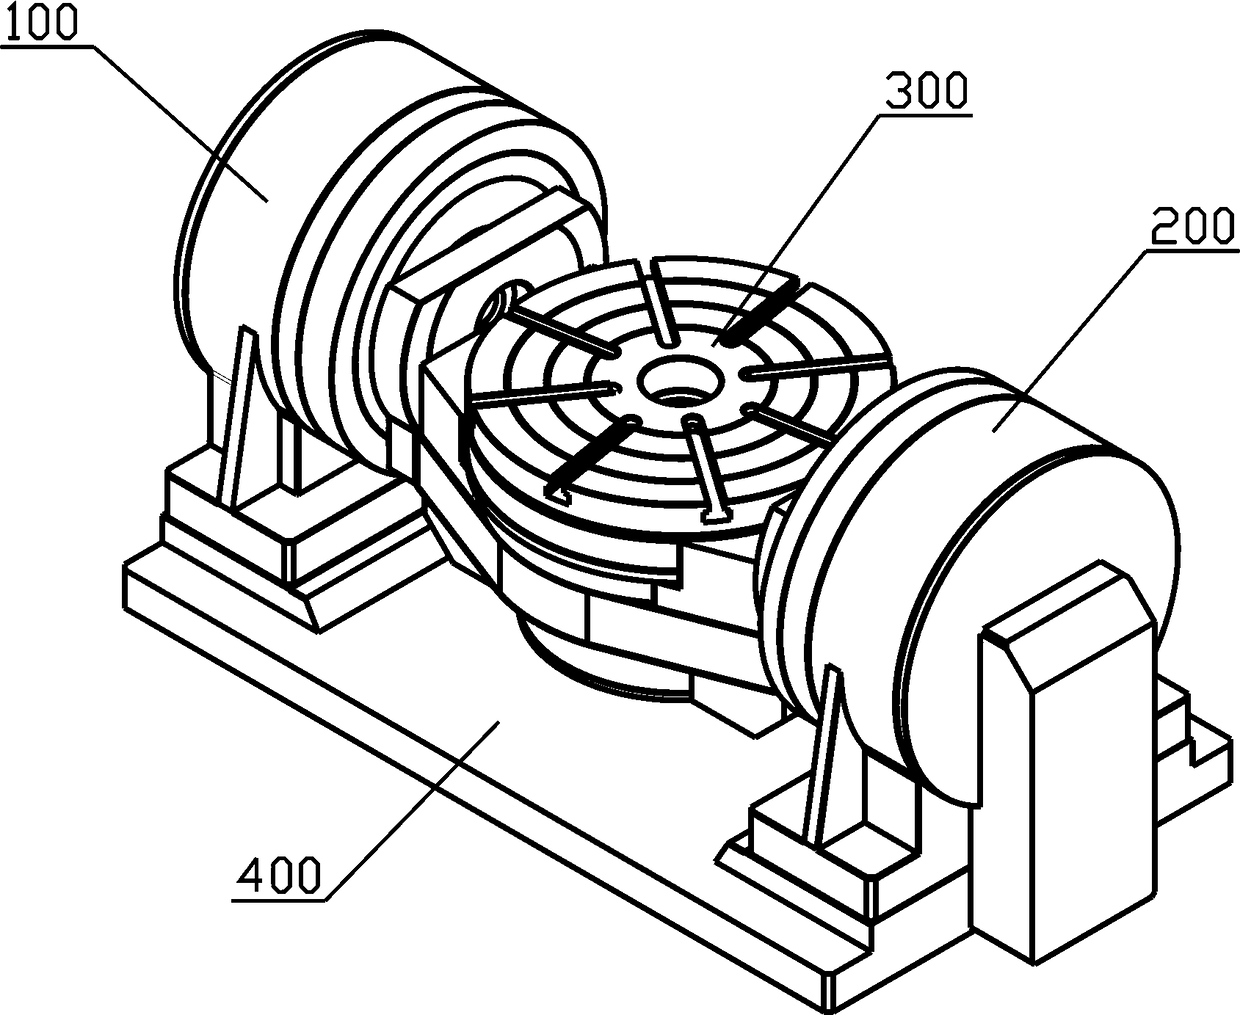 A dual-axis CNC rotary table driven by inclined axes and dual motors